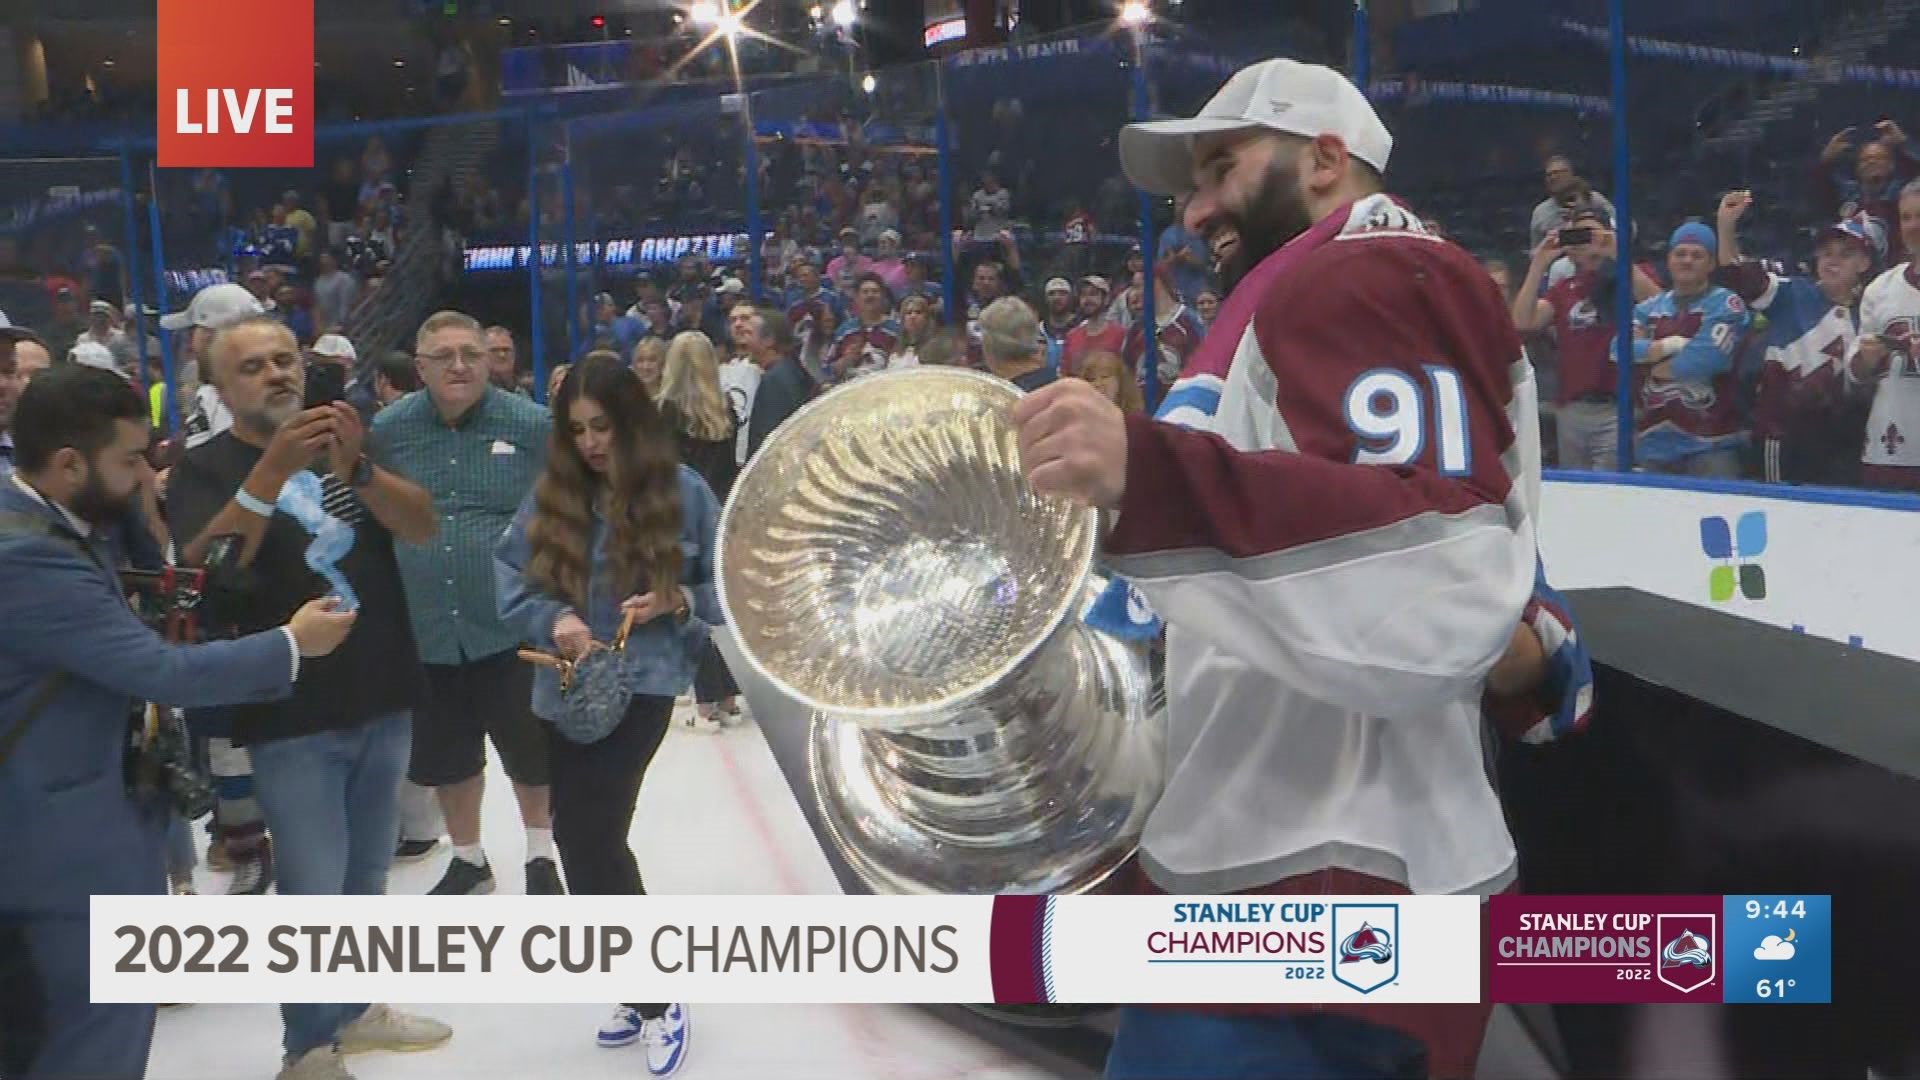 Avalanche players celebrated on the ice and fans celebrated downtown after the Avs' Stanley Cup victory.